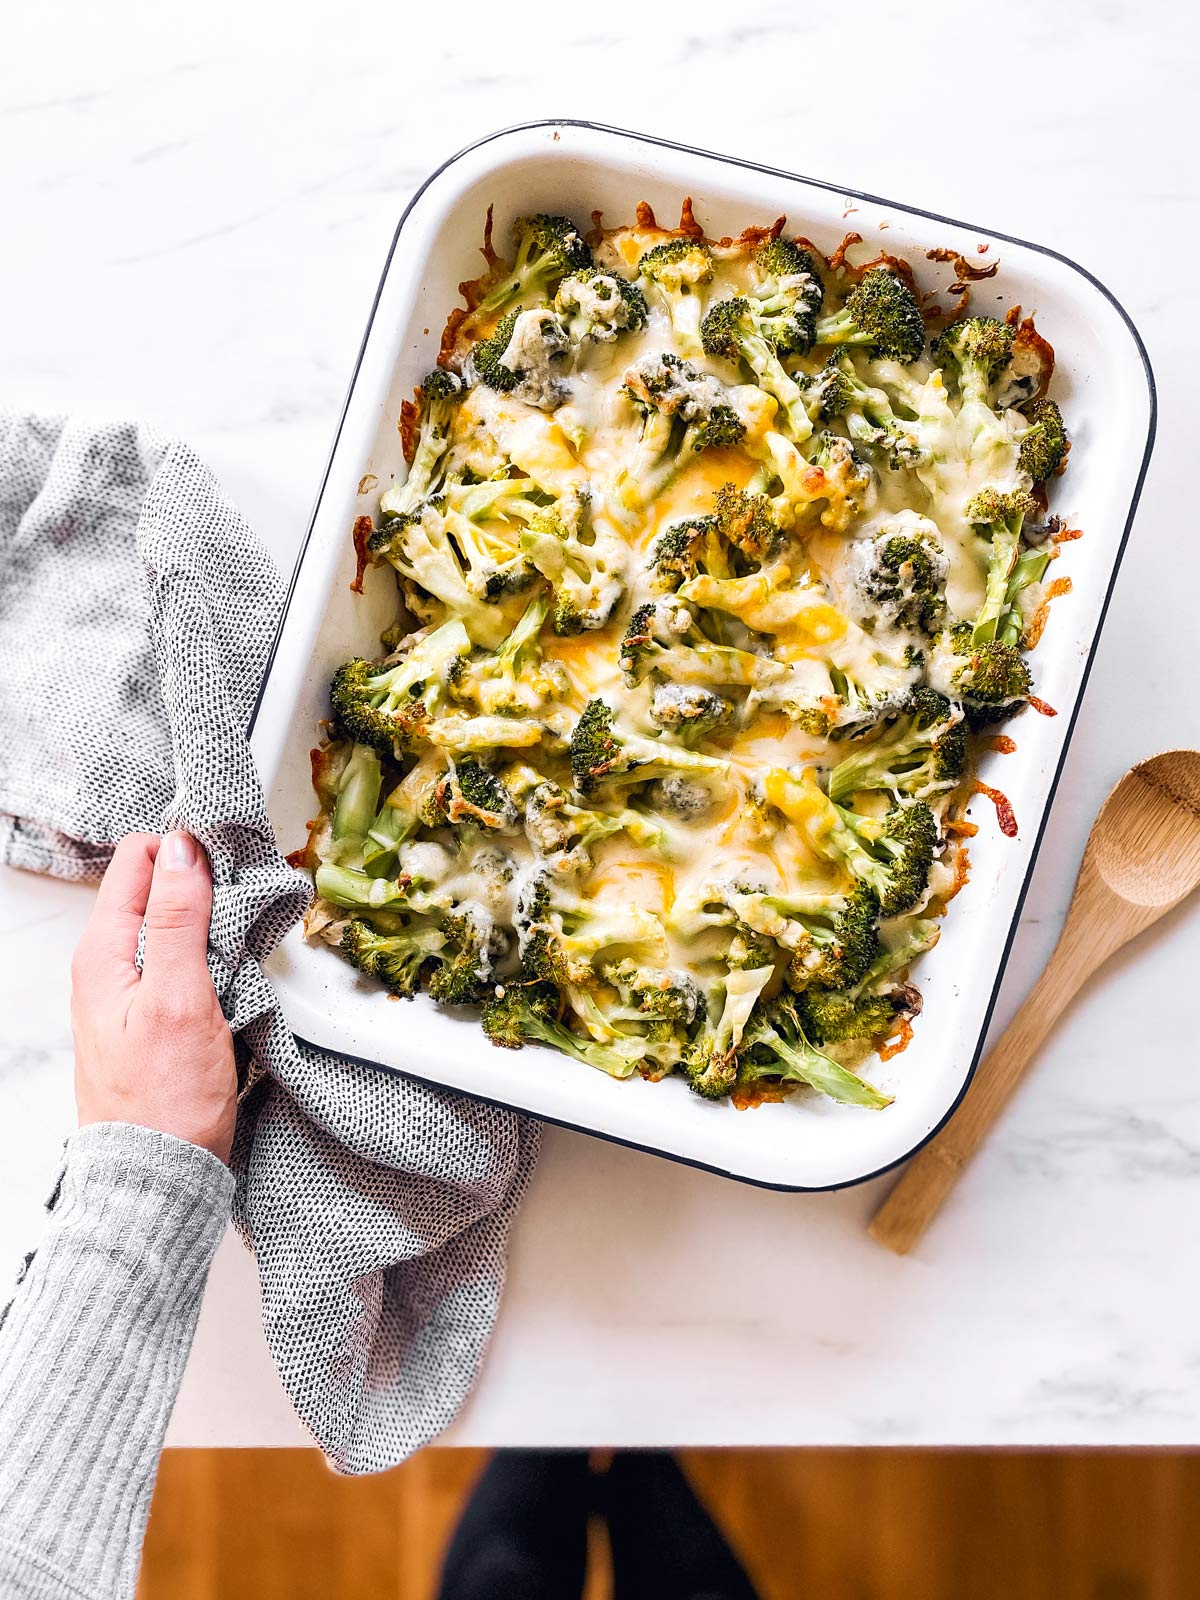 female hand holding casserole dish with baked chicken and broccoli